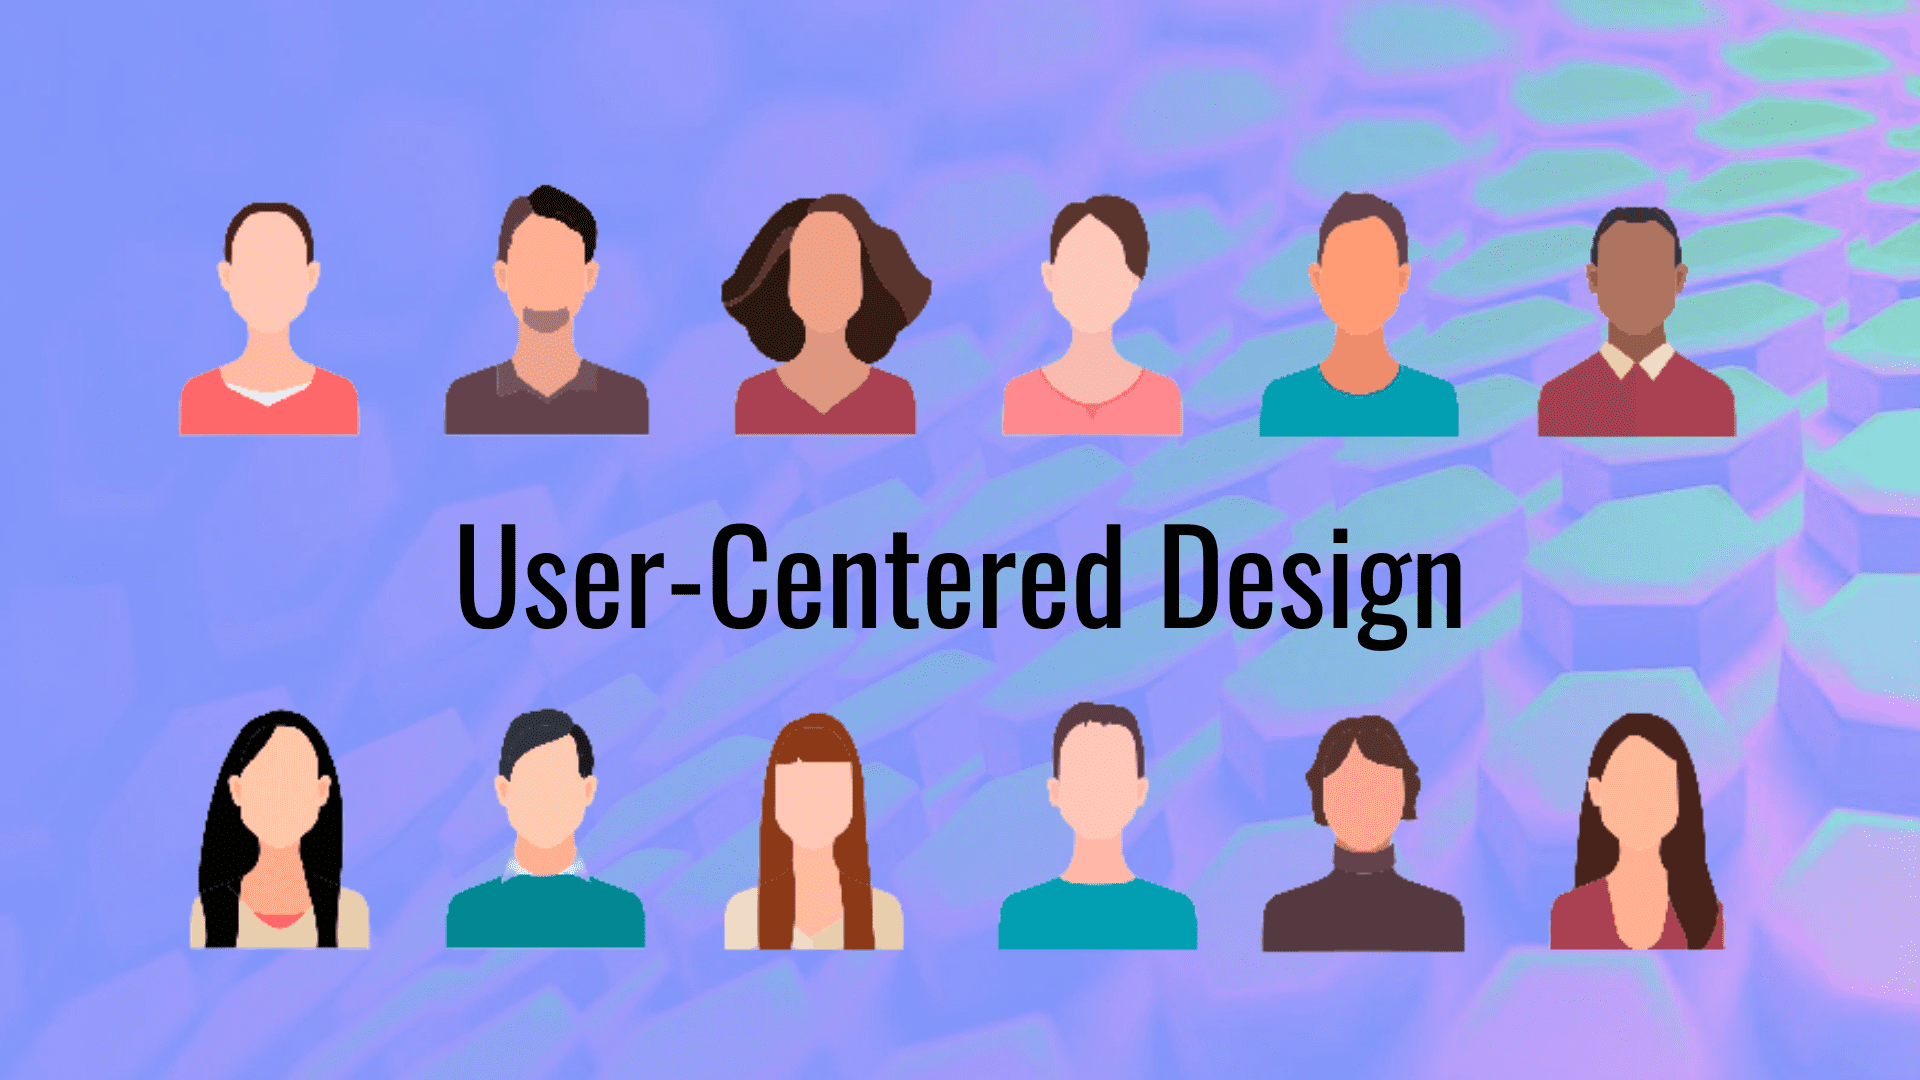 The core principles of User-Centered Design